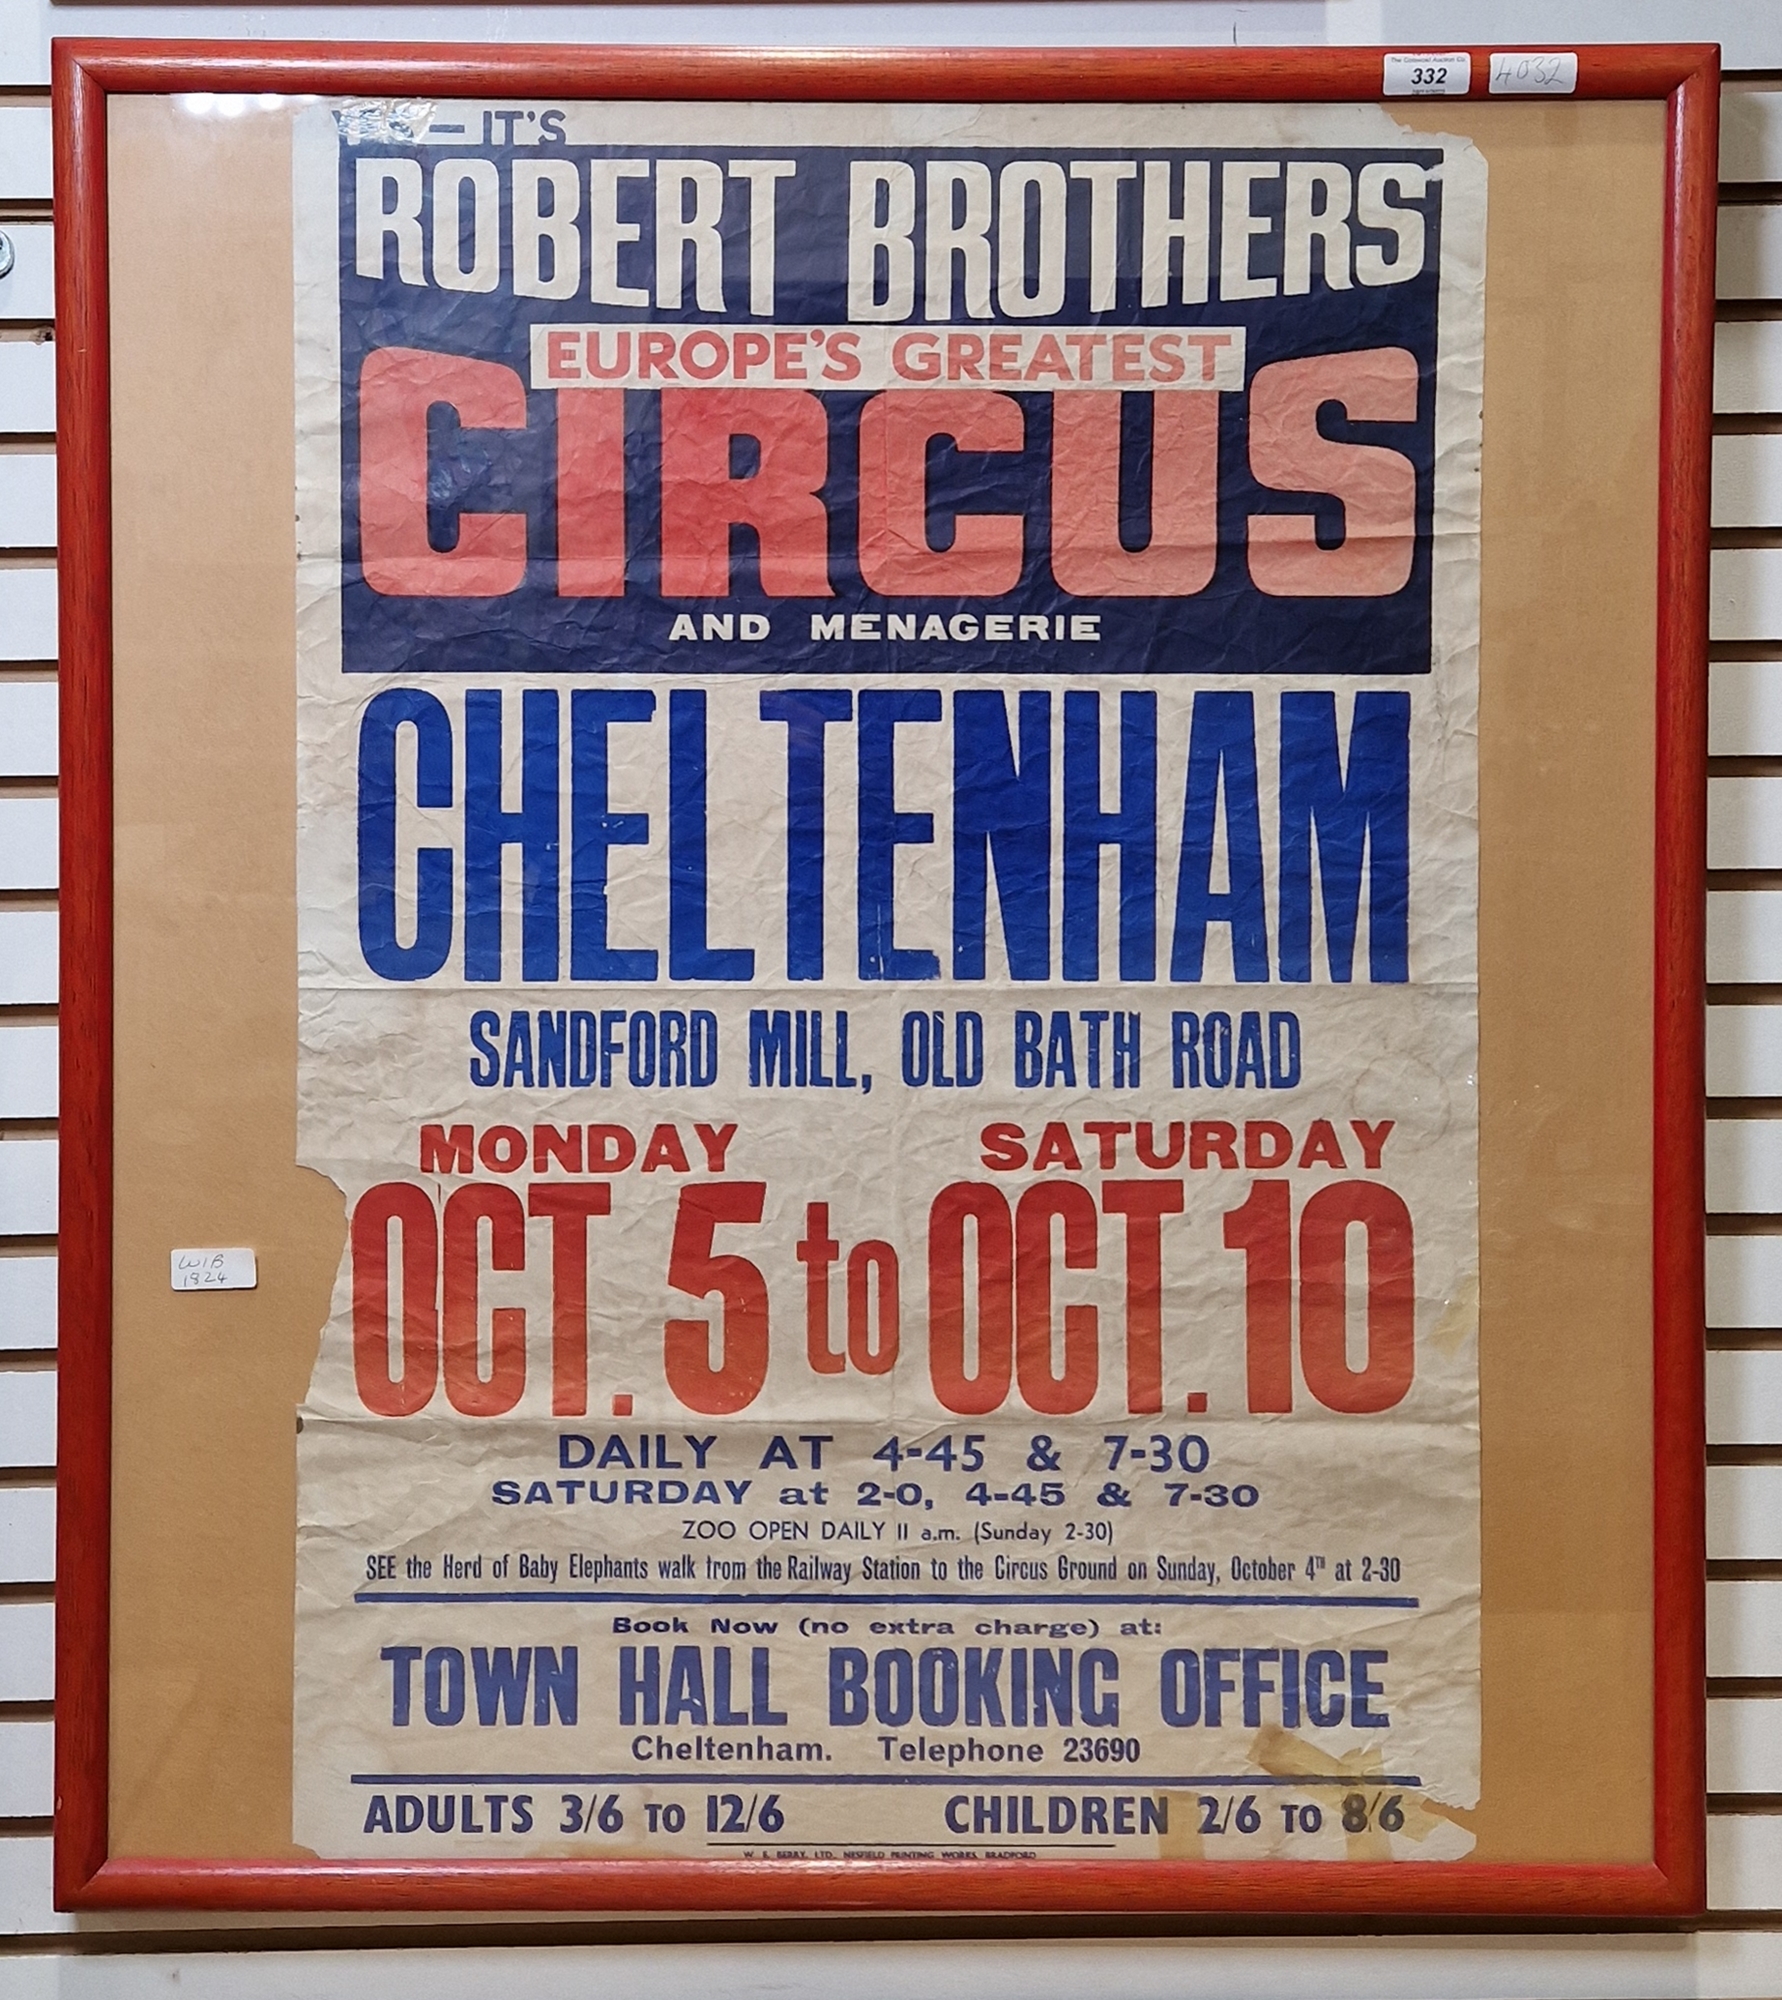 Vintage circus poster for Robert Brothers Circus and Menagerie, Cheltenham show at Sandford Mill,